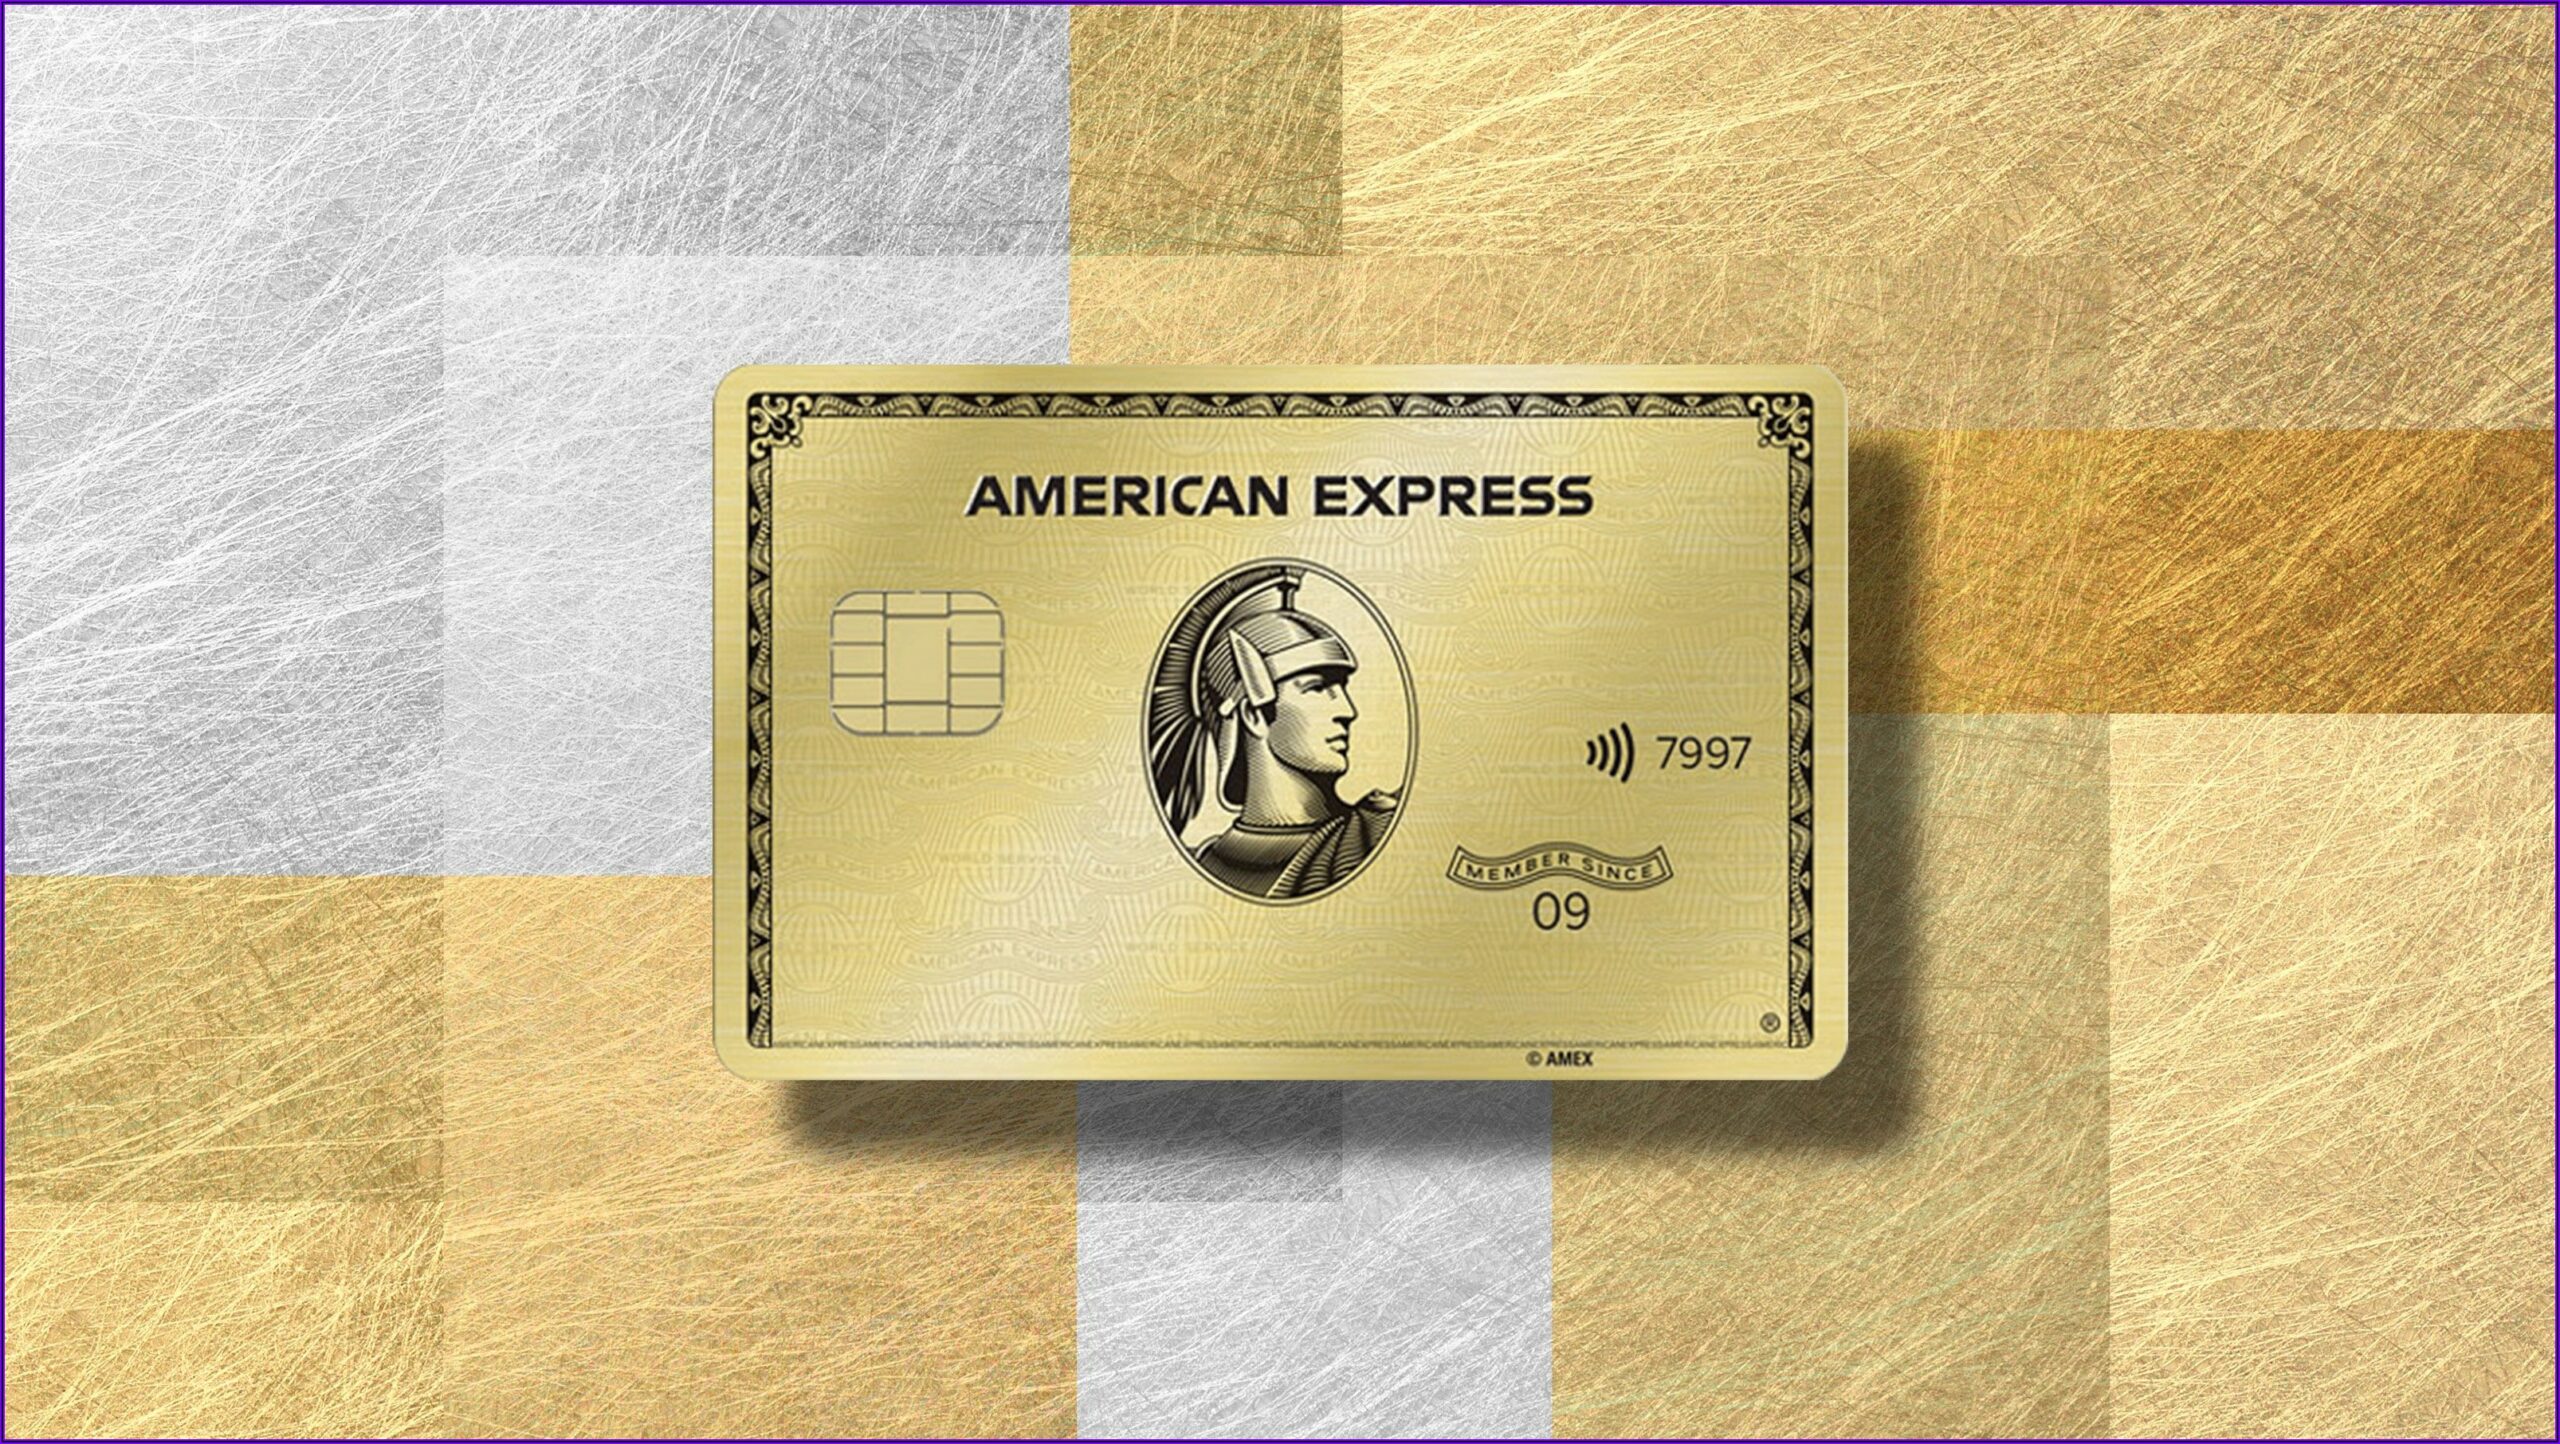 American Express Corporate Card Reward Points